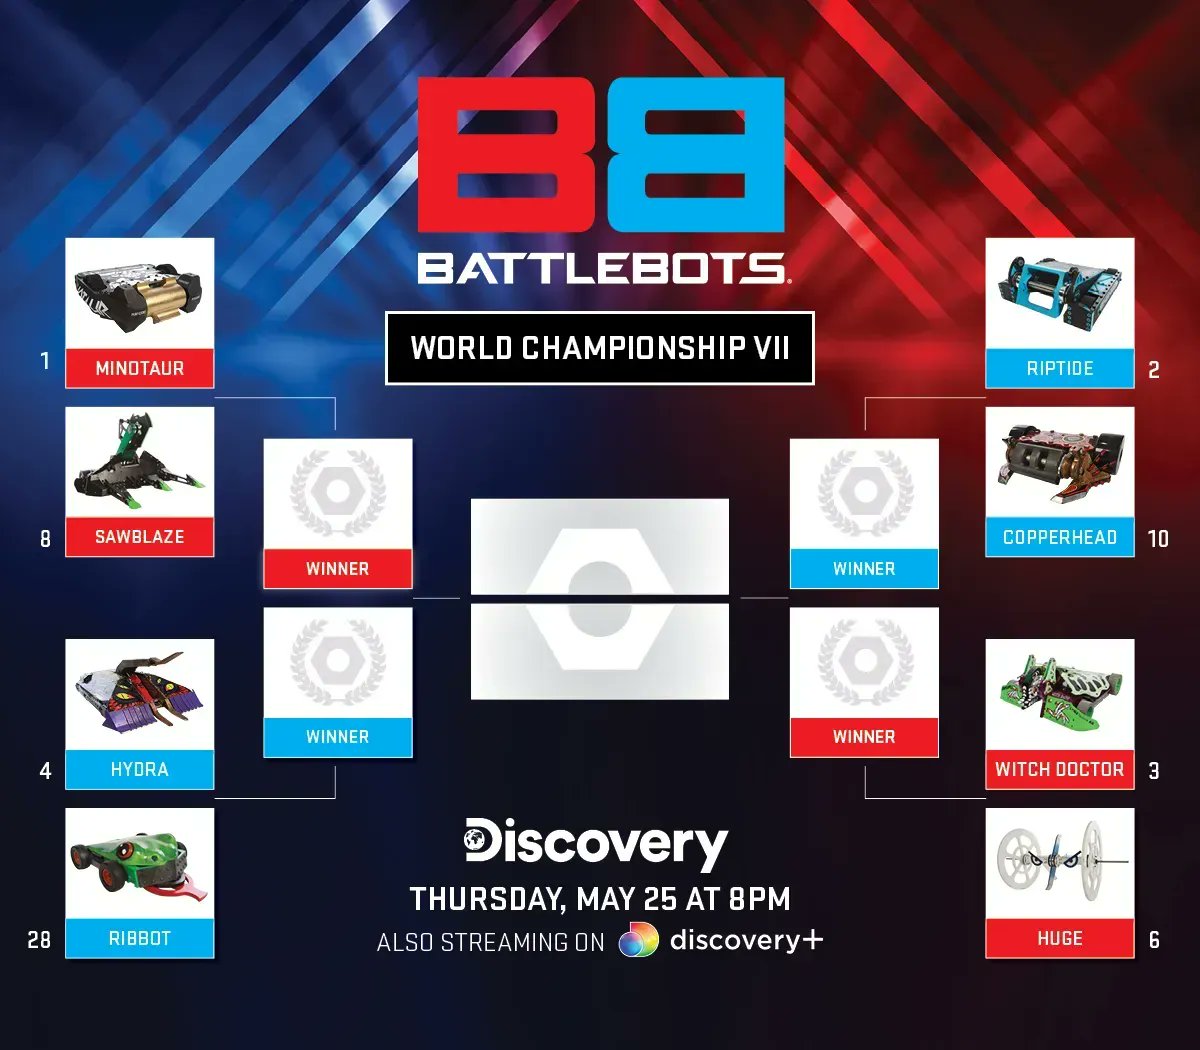 BattleBots on Twitter "THIS IS IT THURSDAY A champion will hoist